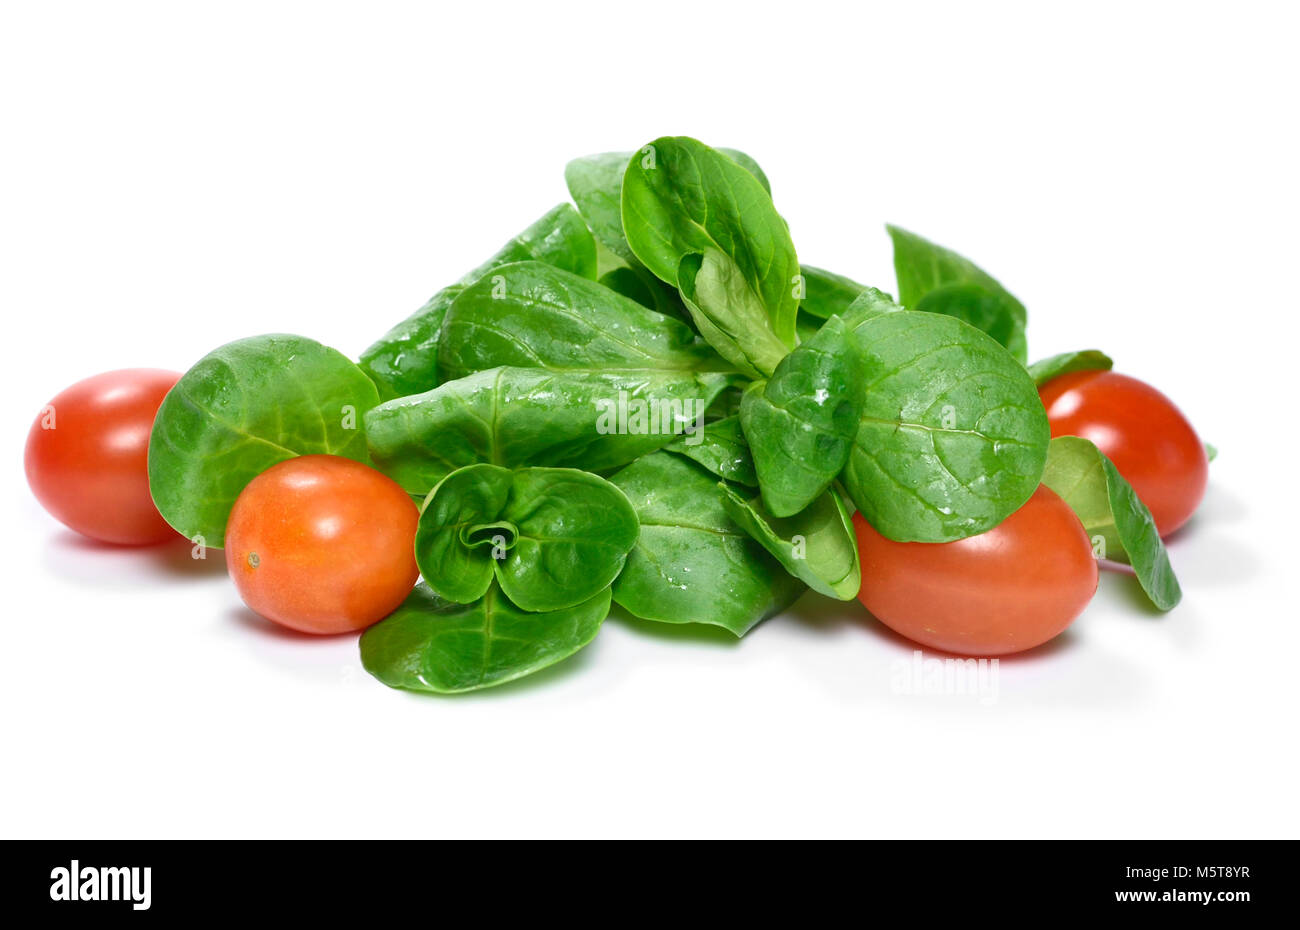 Fresh garden salad with cocktail tomatoes and corn salad. Healthy eating scene or dieting. Green salad, isolated on white background with copy space. Stock Photo